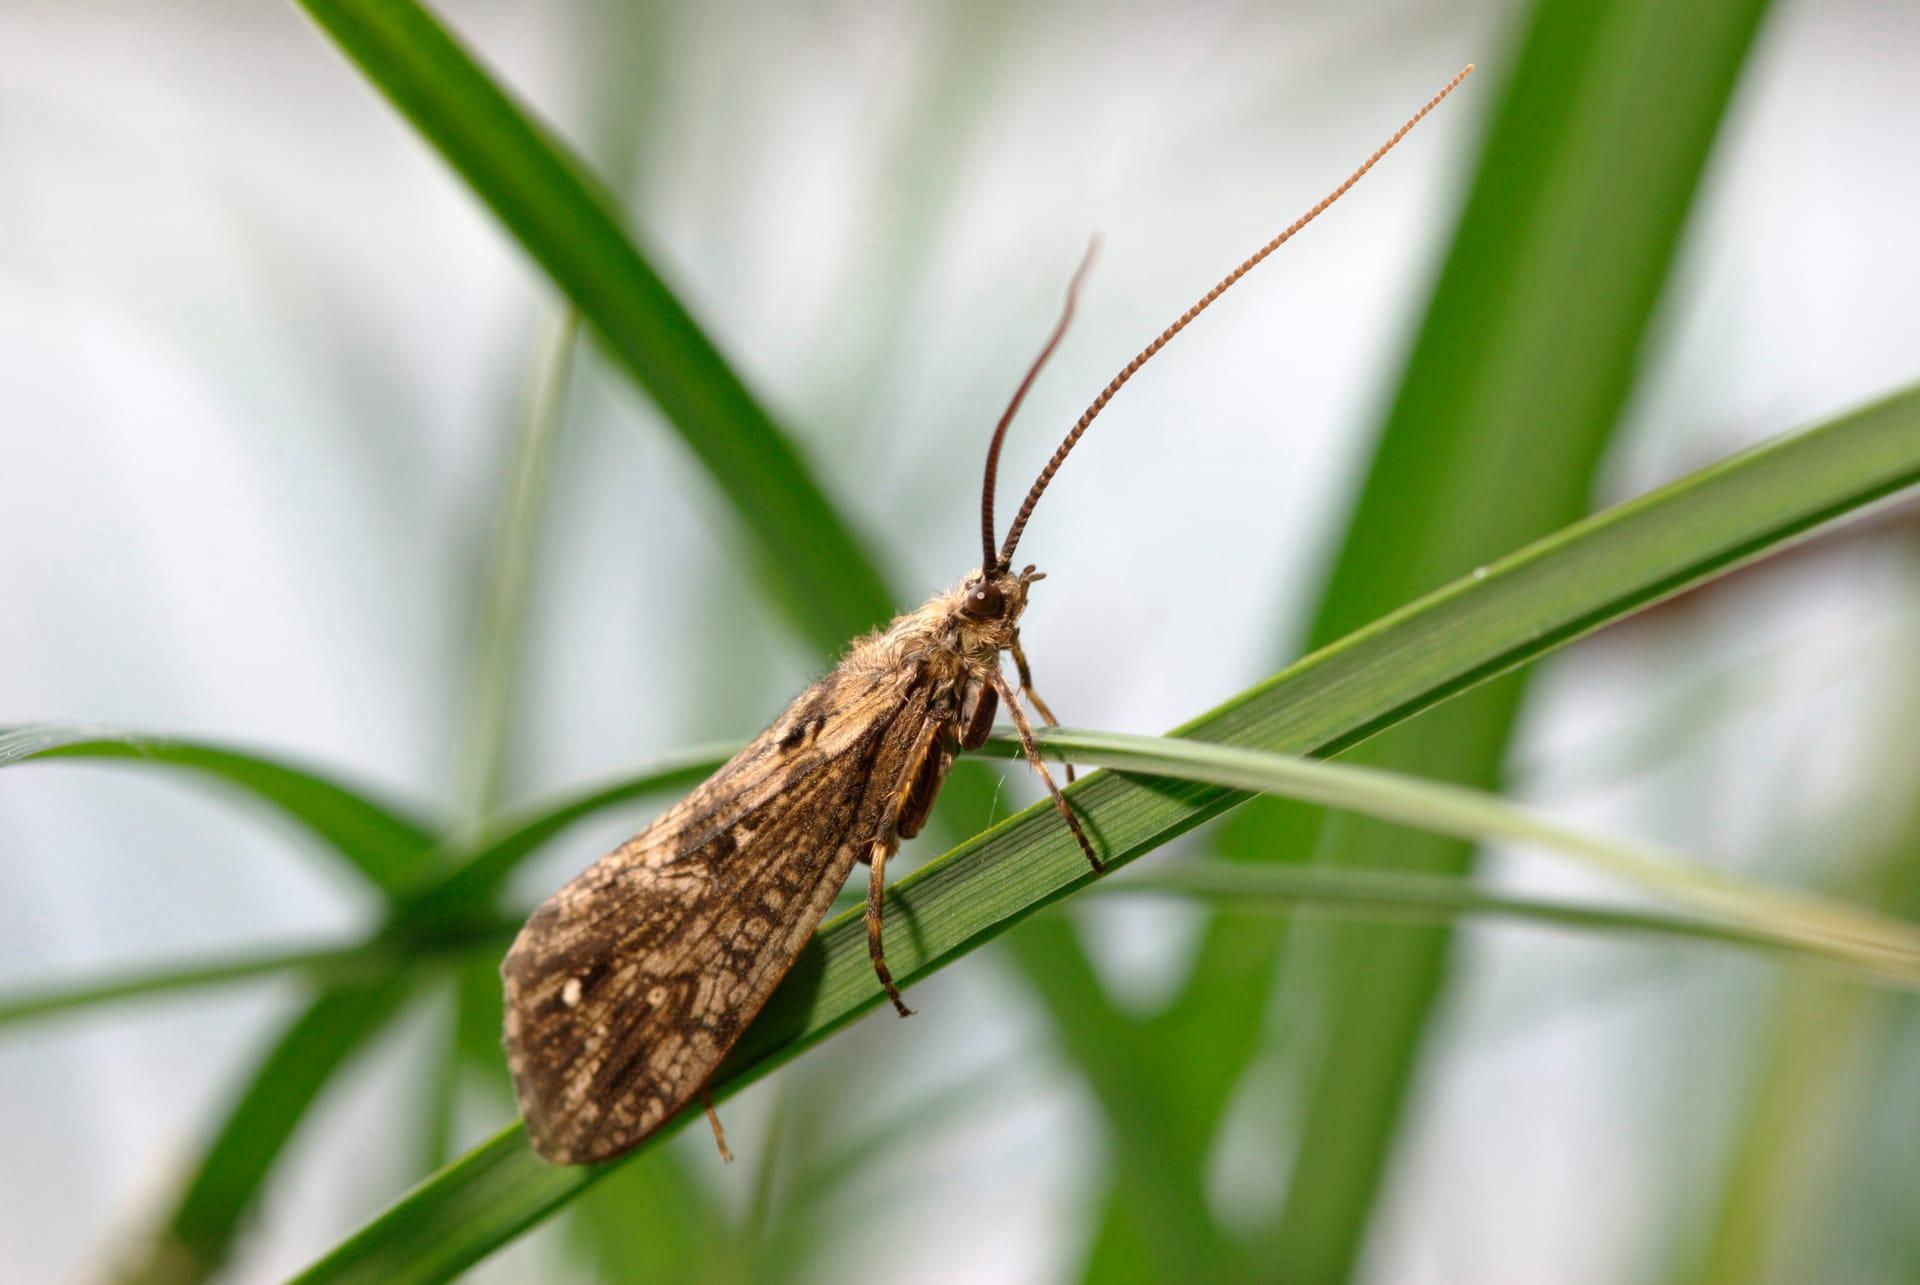 Caddisfly pictures